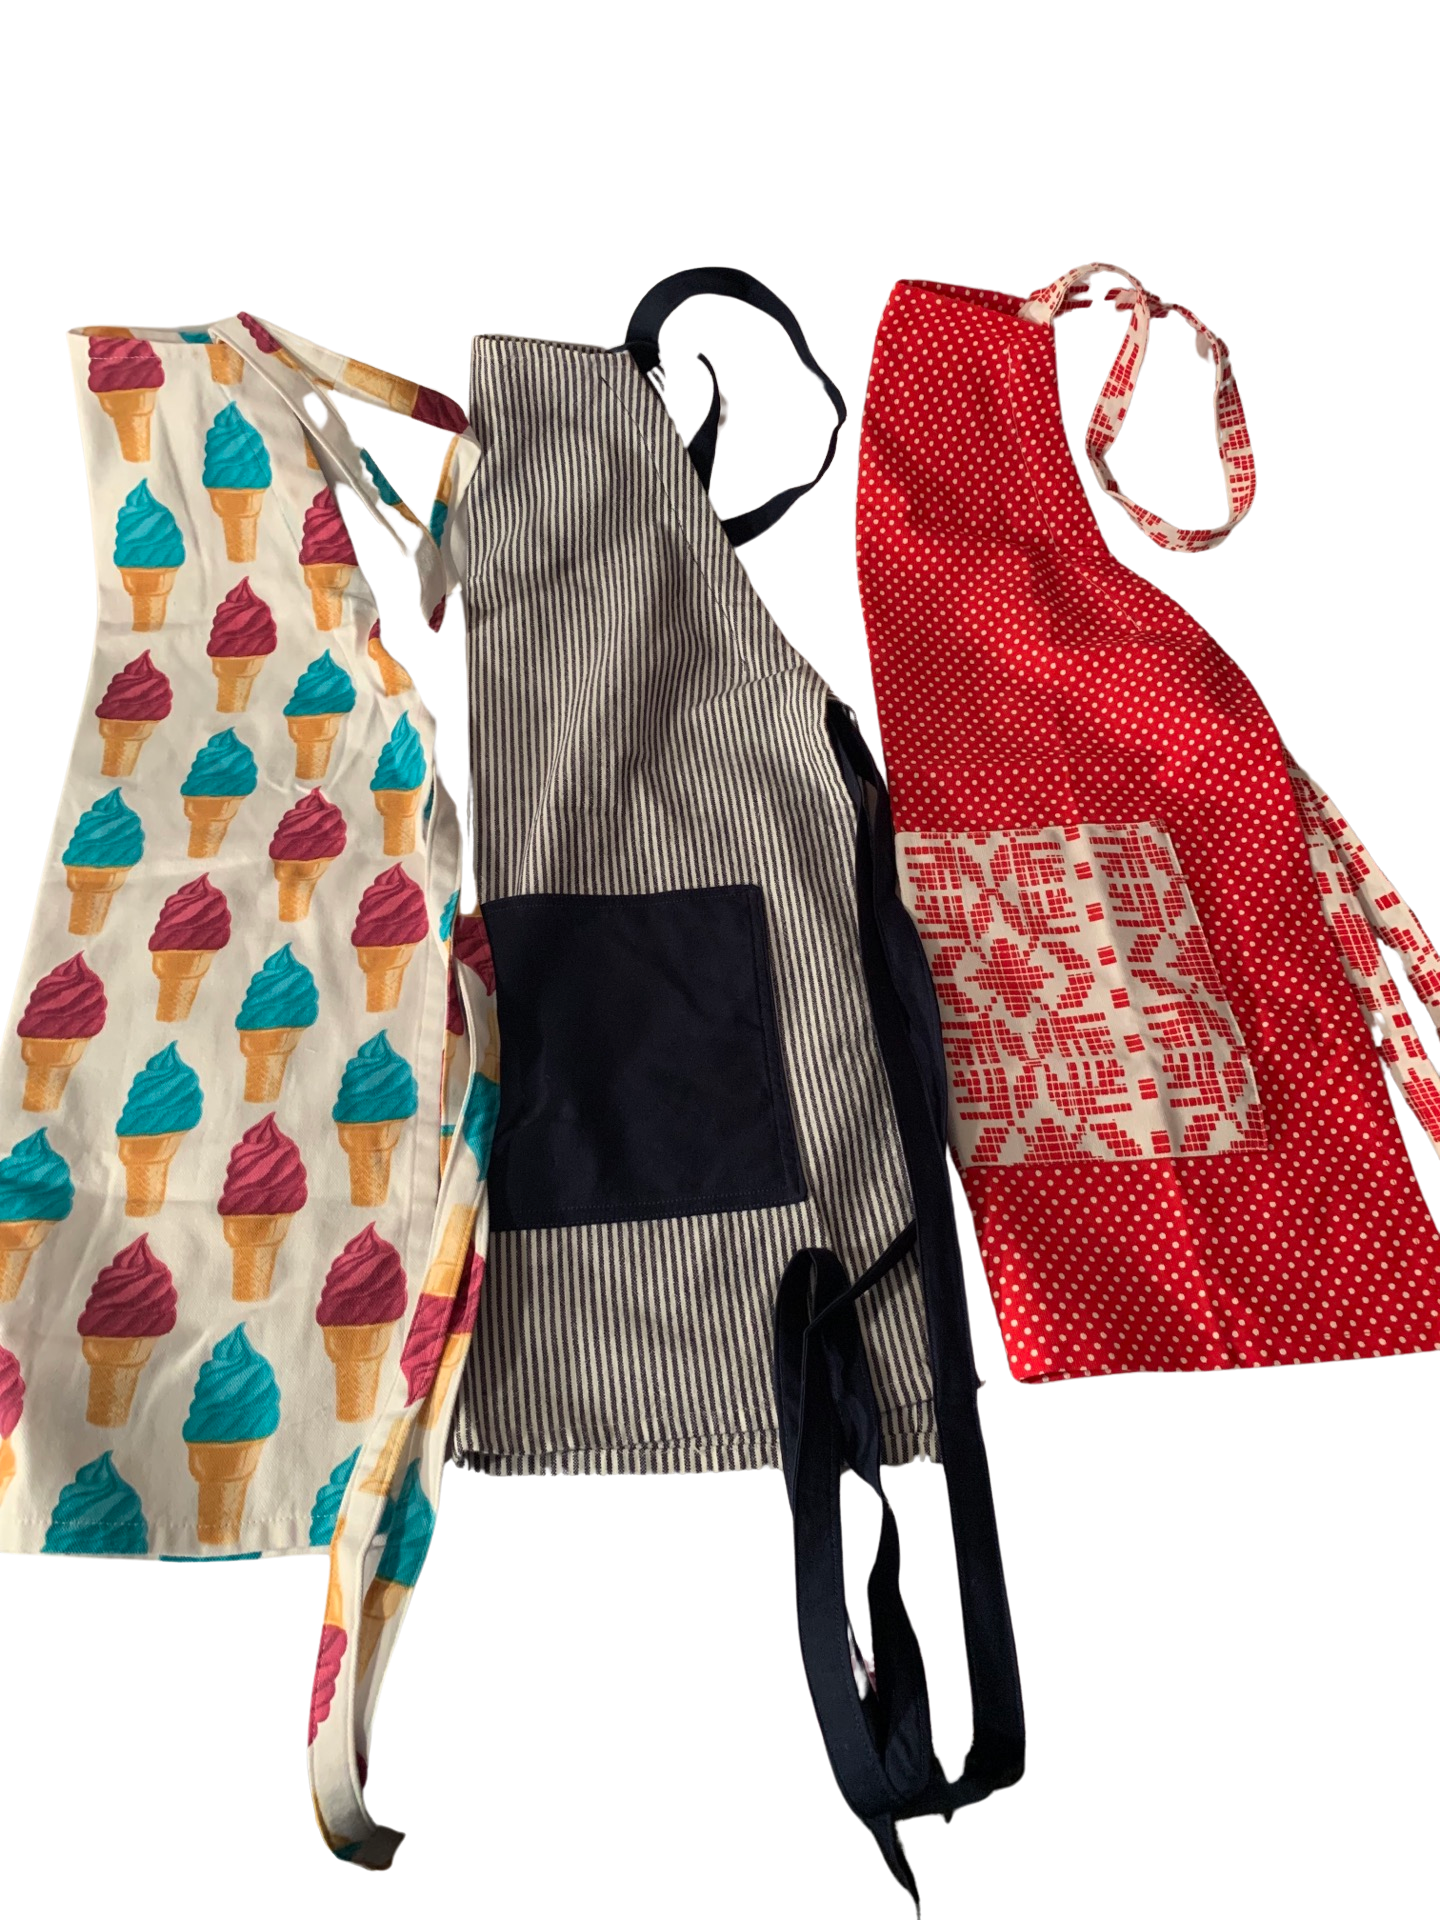 Adult Apron with pockets, kitchen apron, adult or large child, washable, craft apron